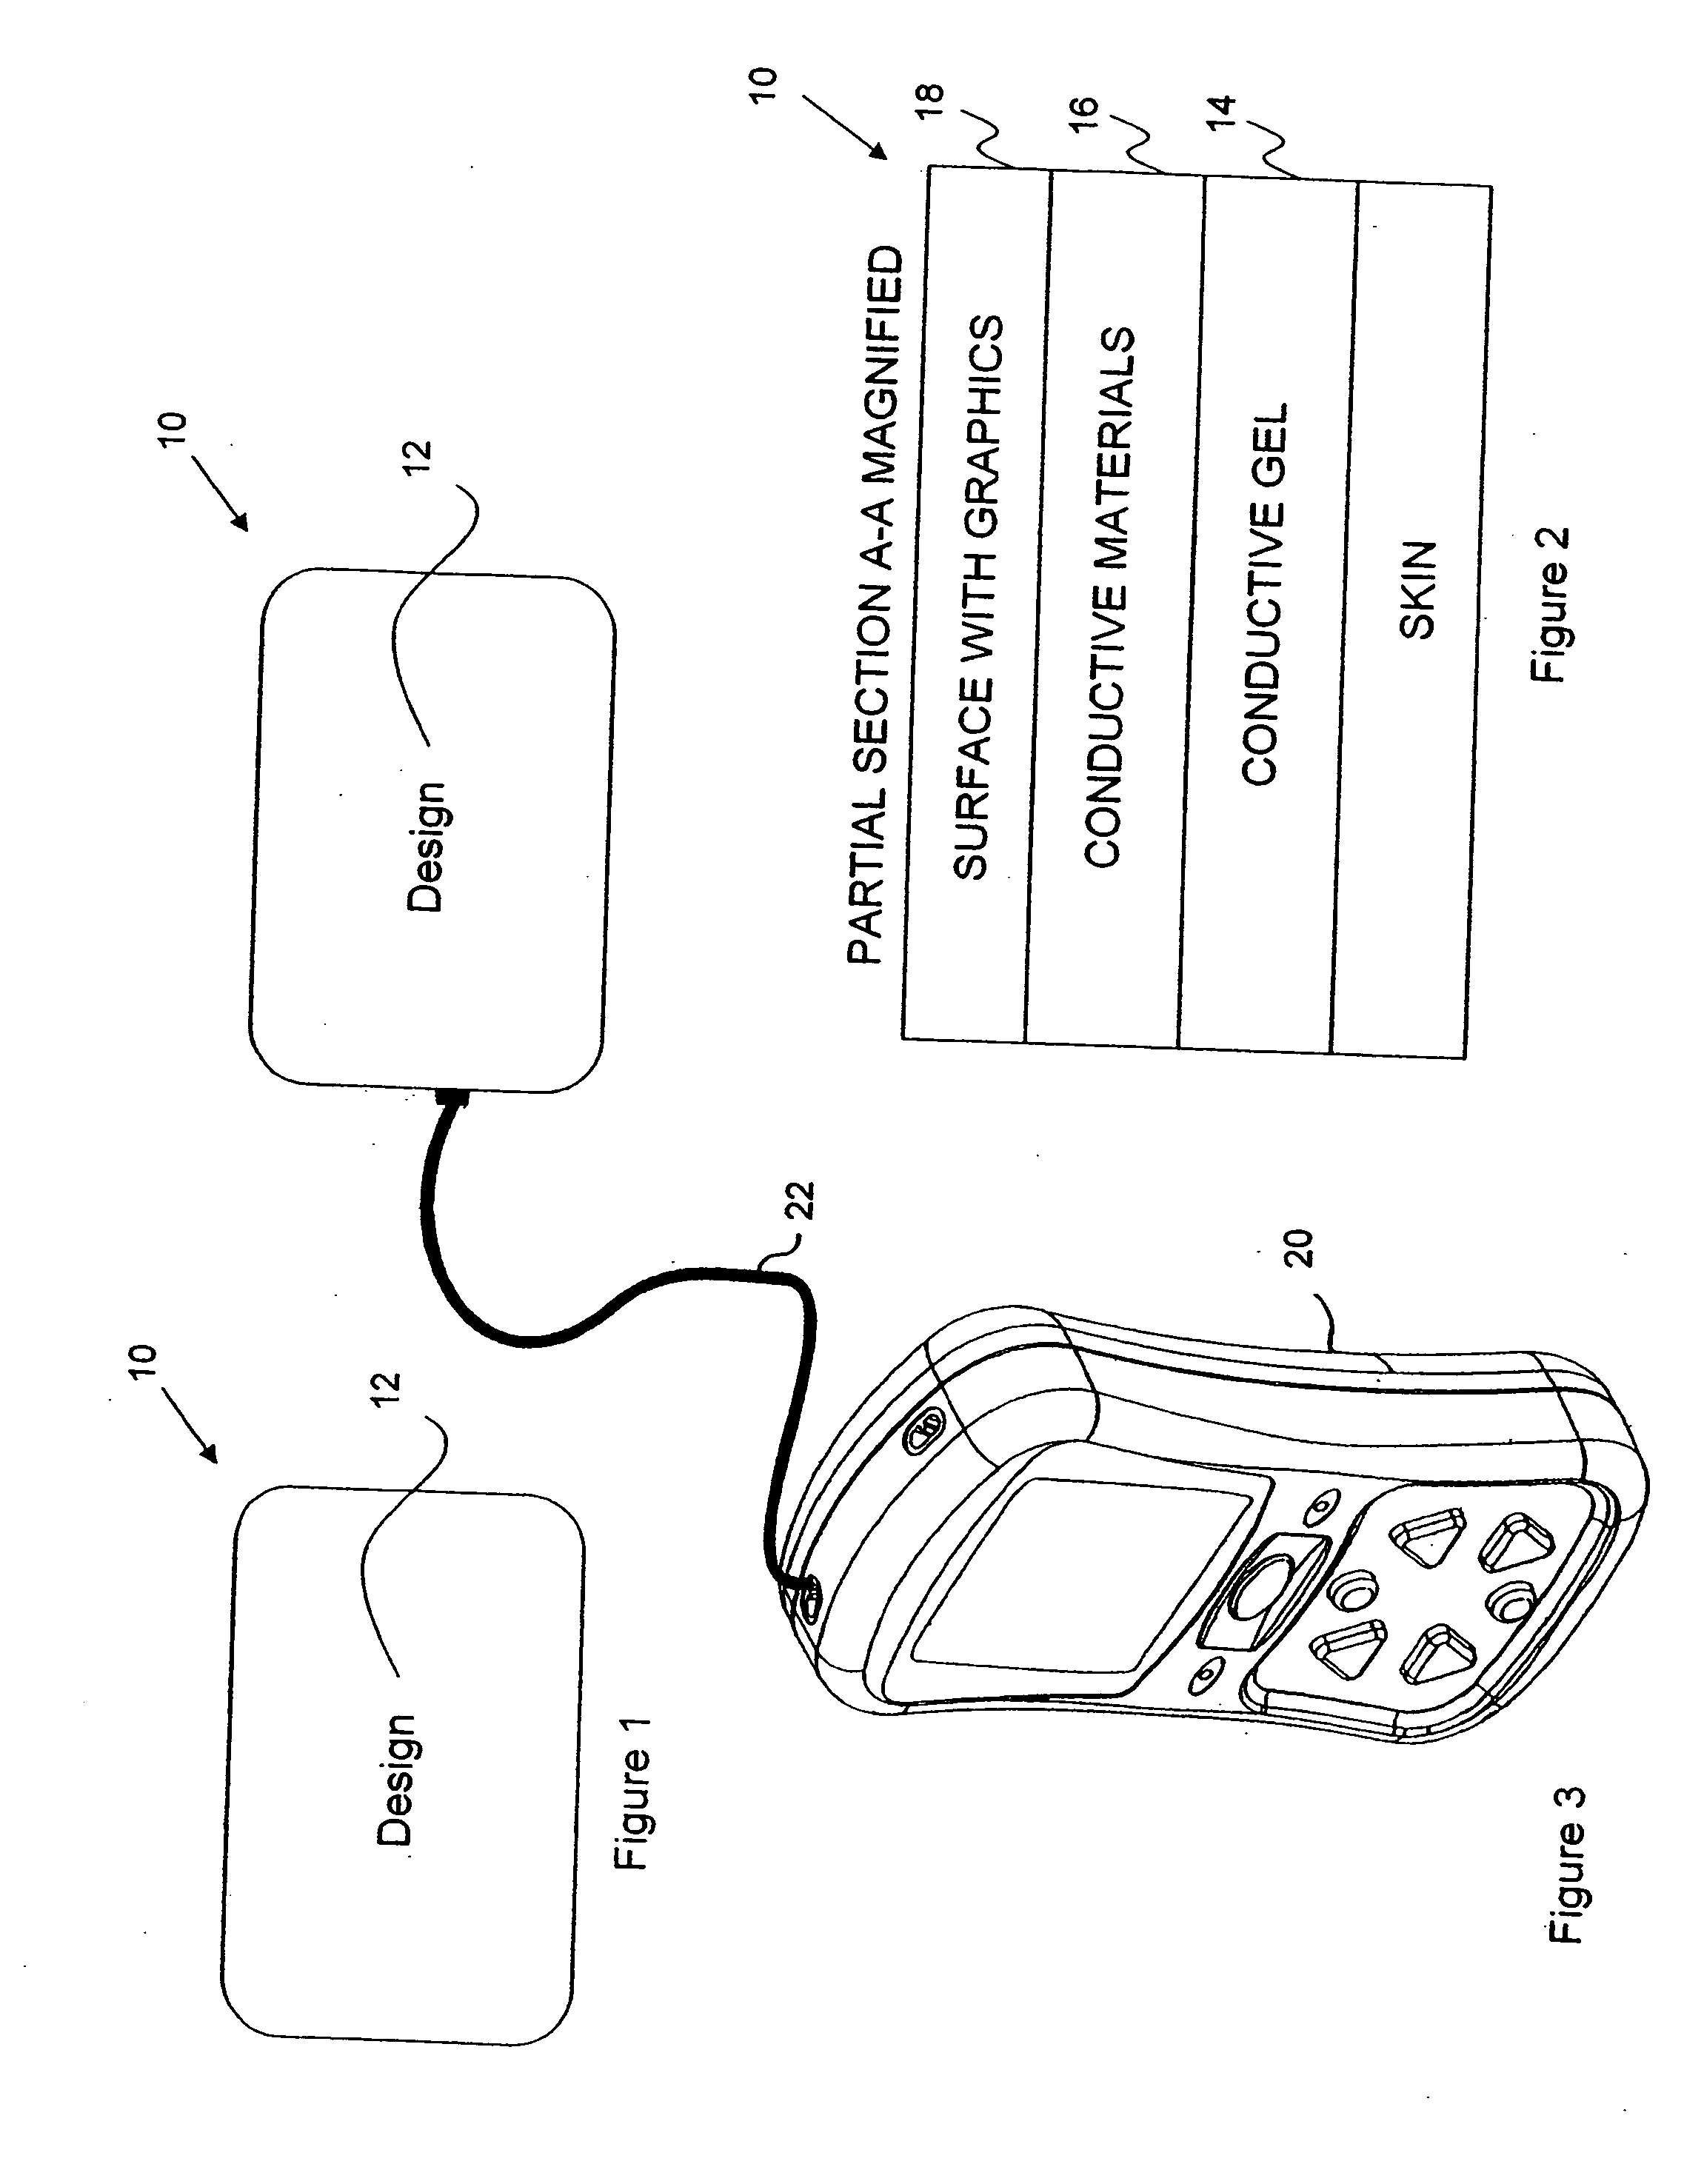 Skin electrodes with design thereon